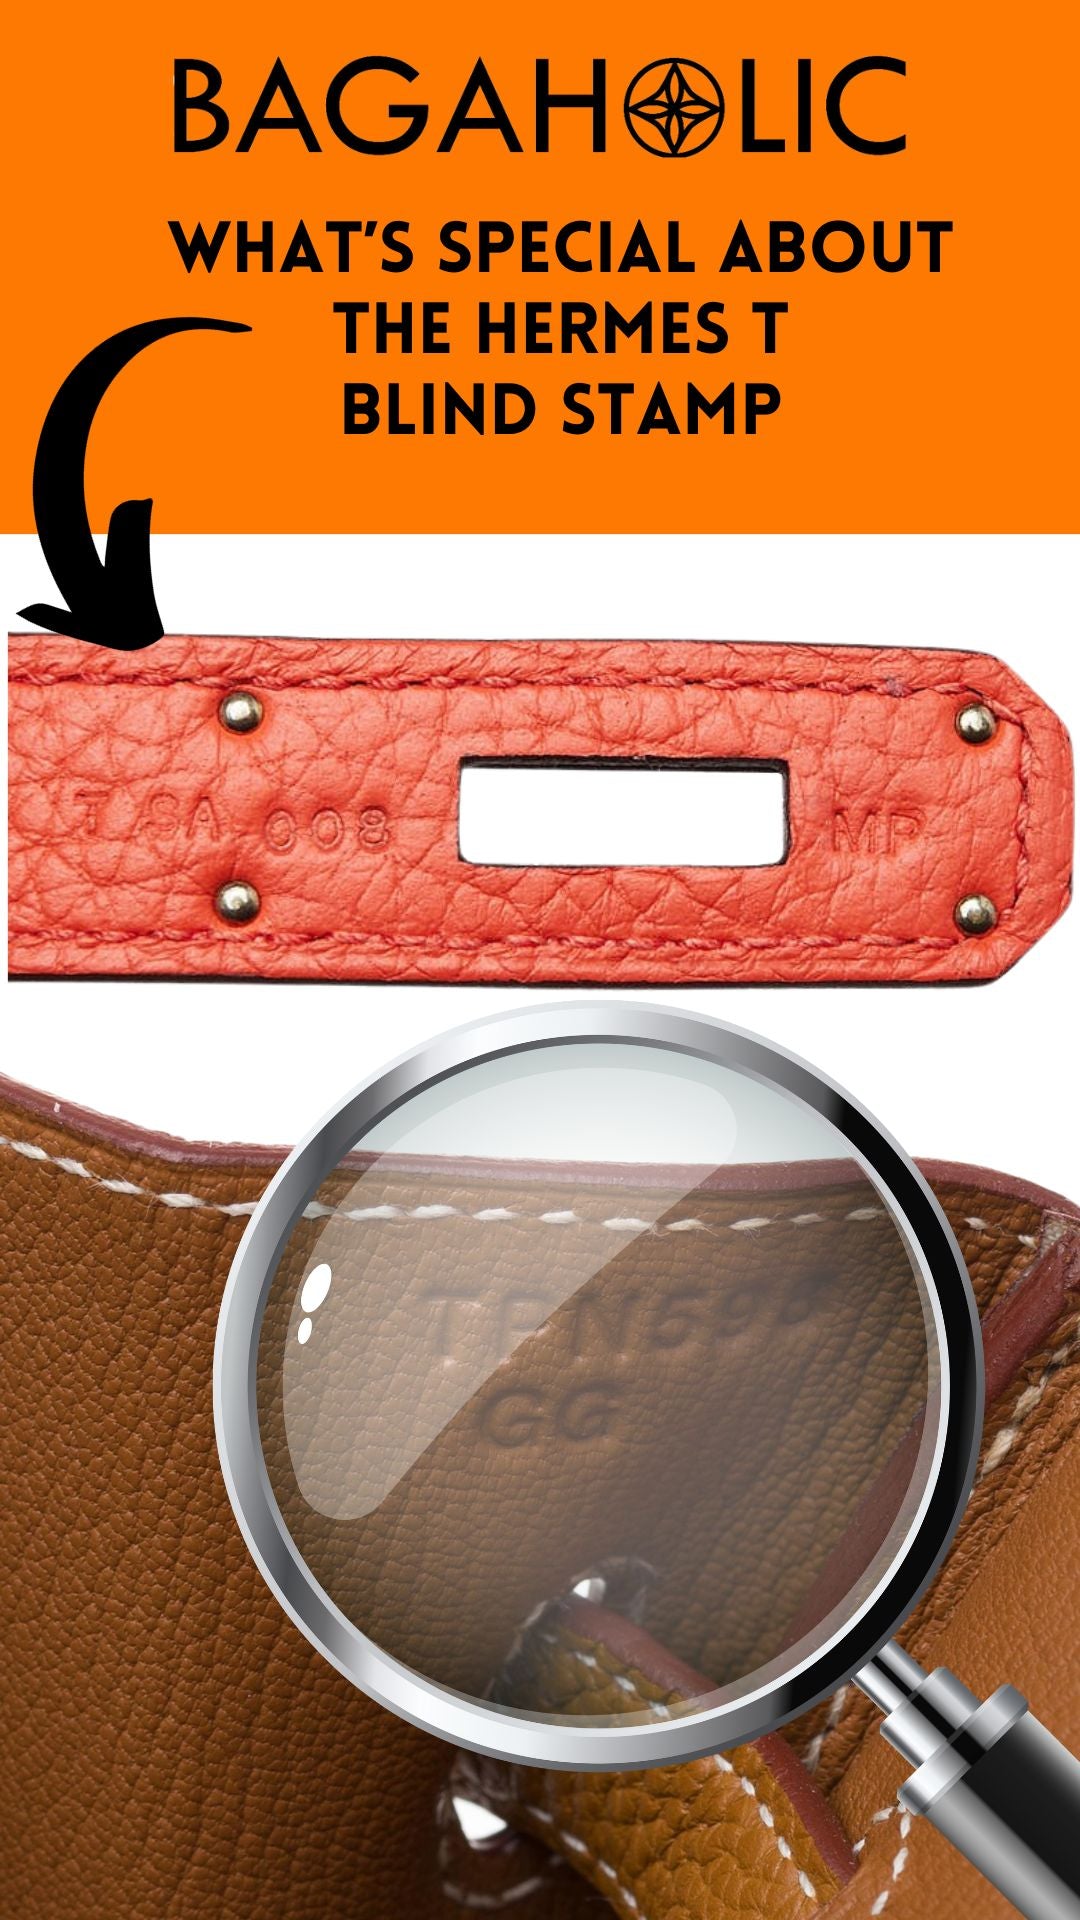 What's So Special About The Hermès T Blind Stamp?